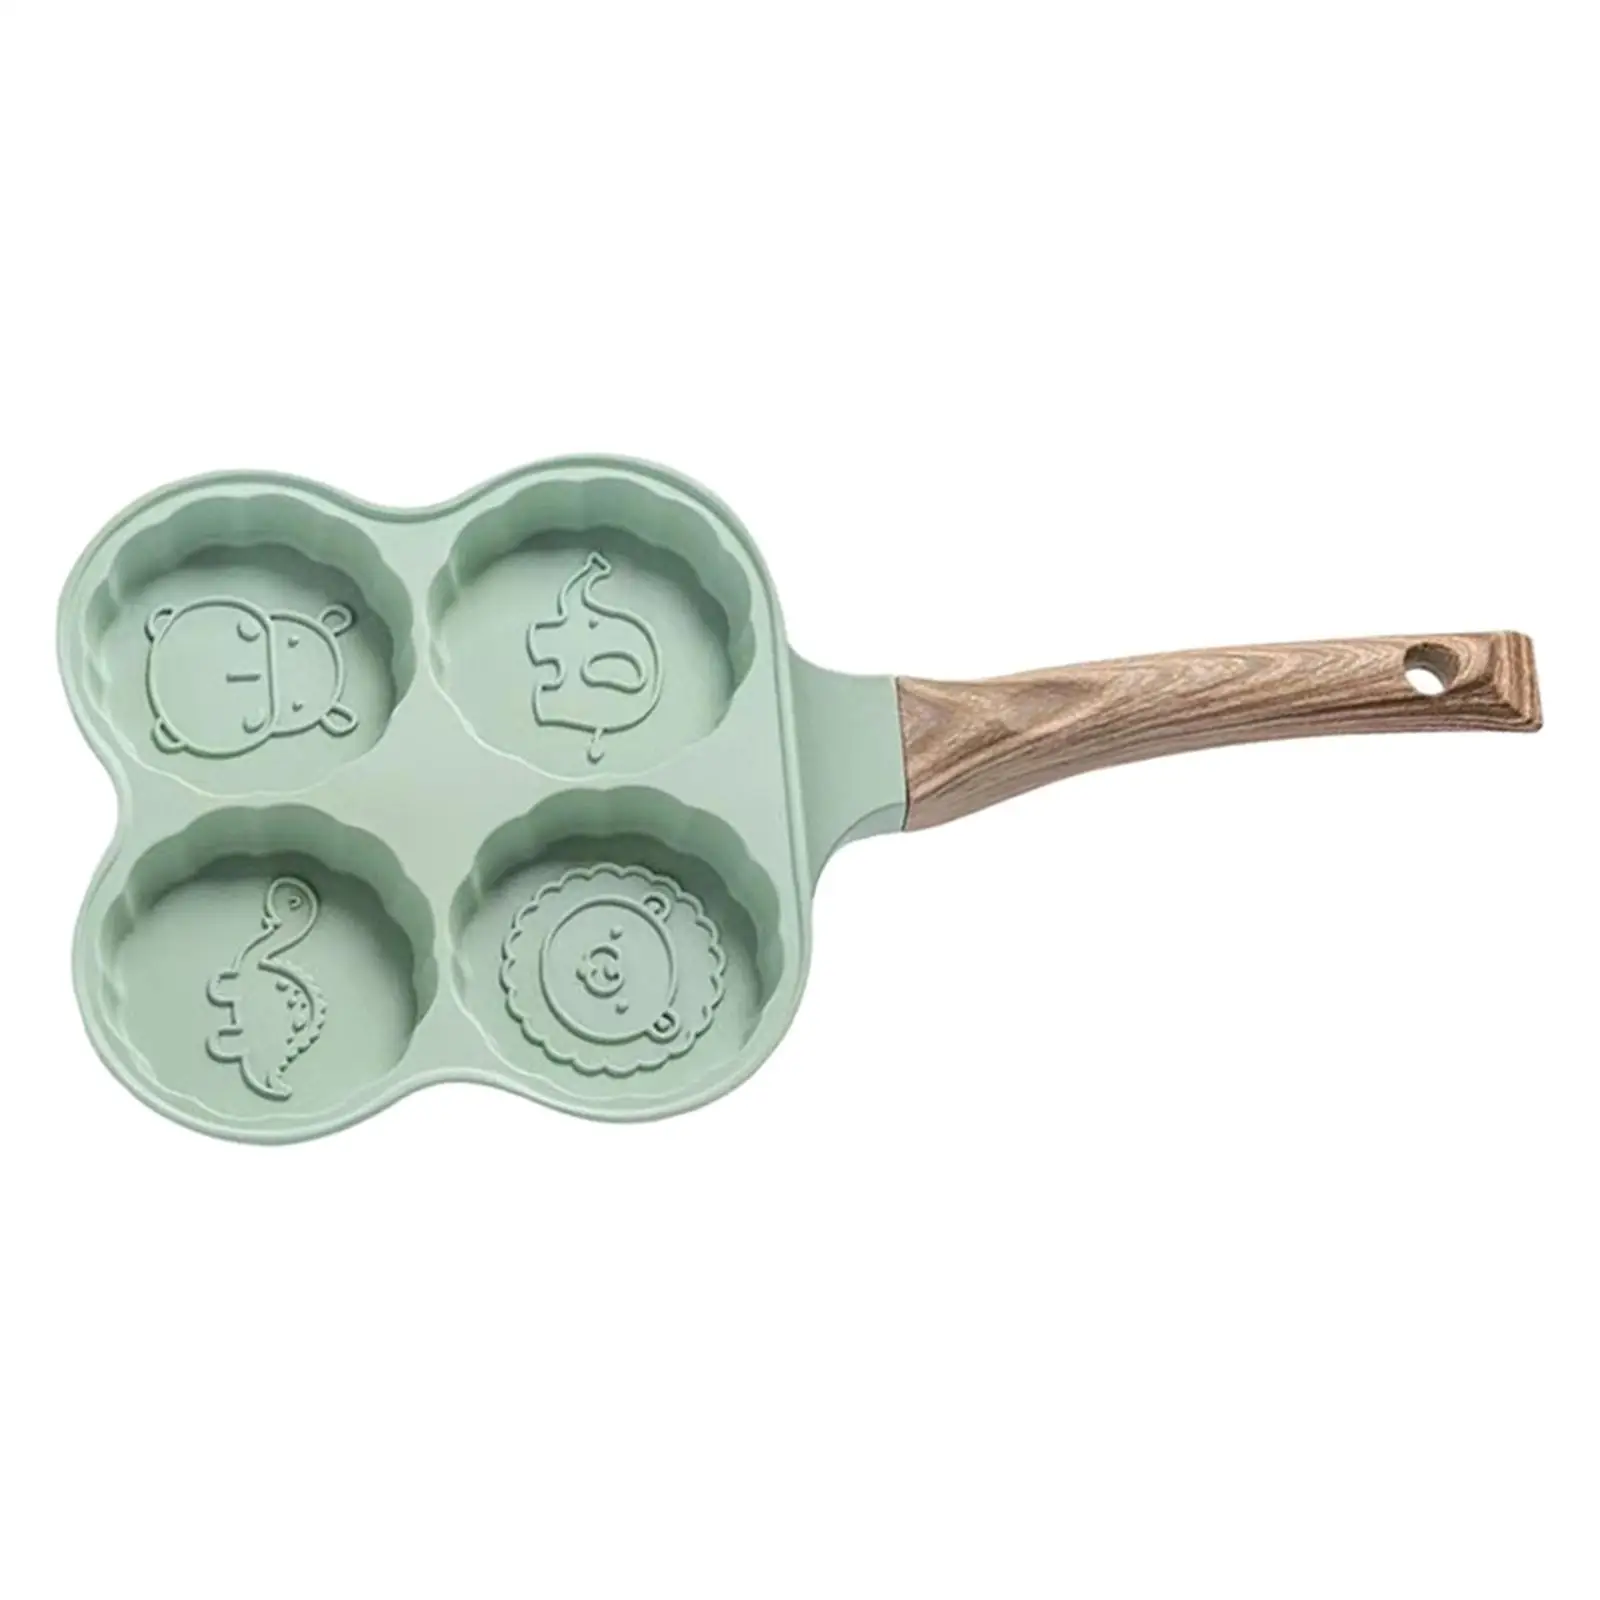 Mini Frying Egg Pans Cookware,Wooden Handle Skillet Omelet Pan,Small Frying Pan